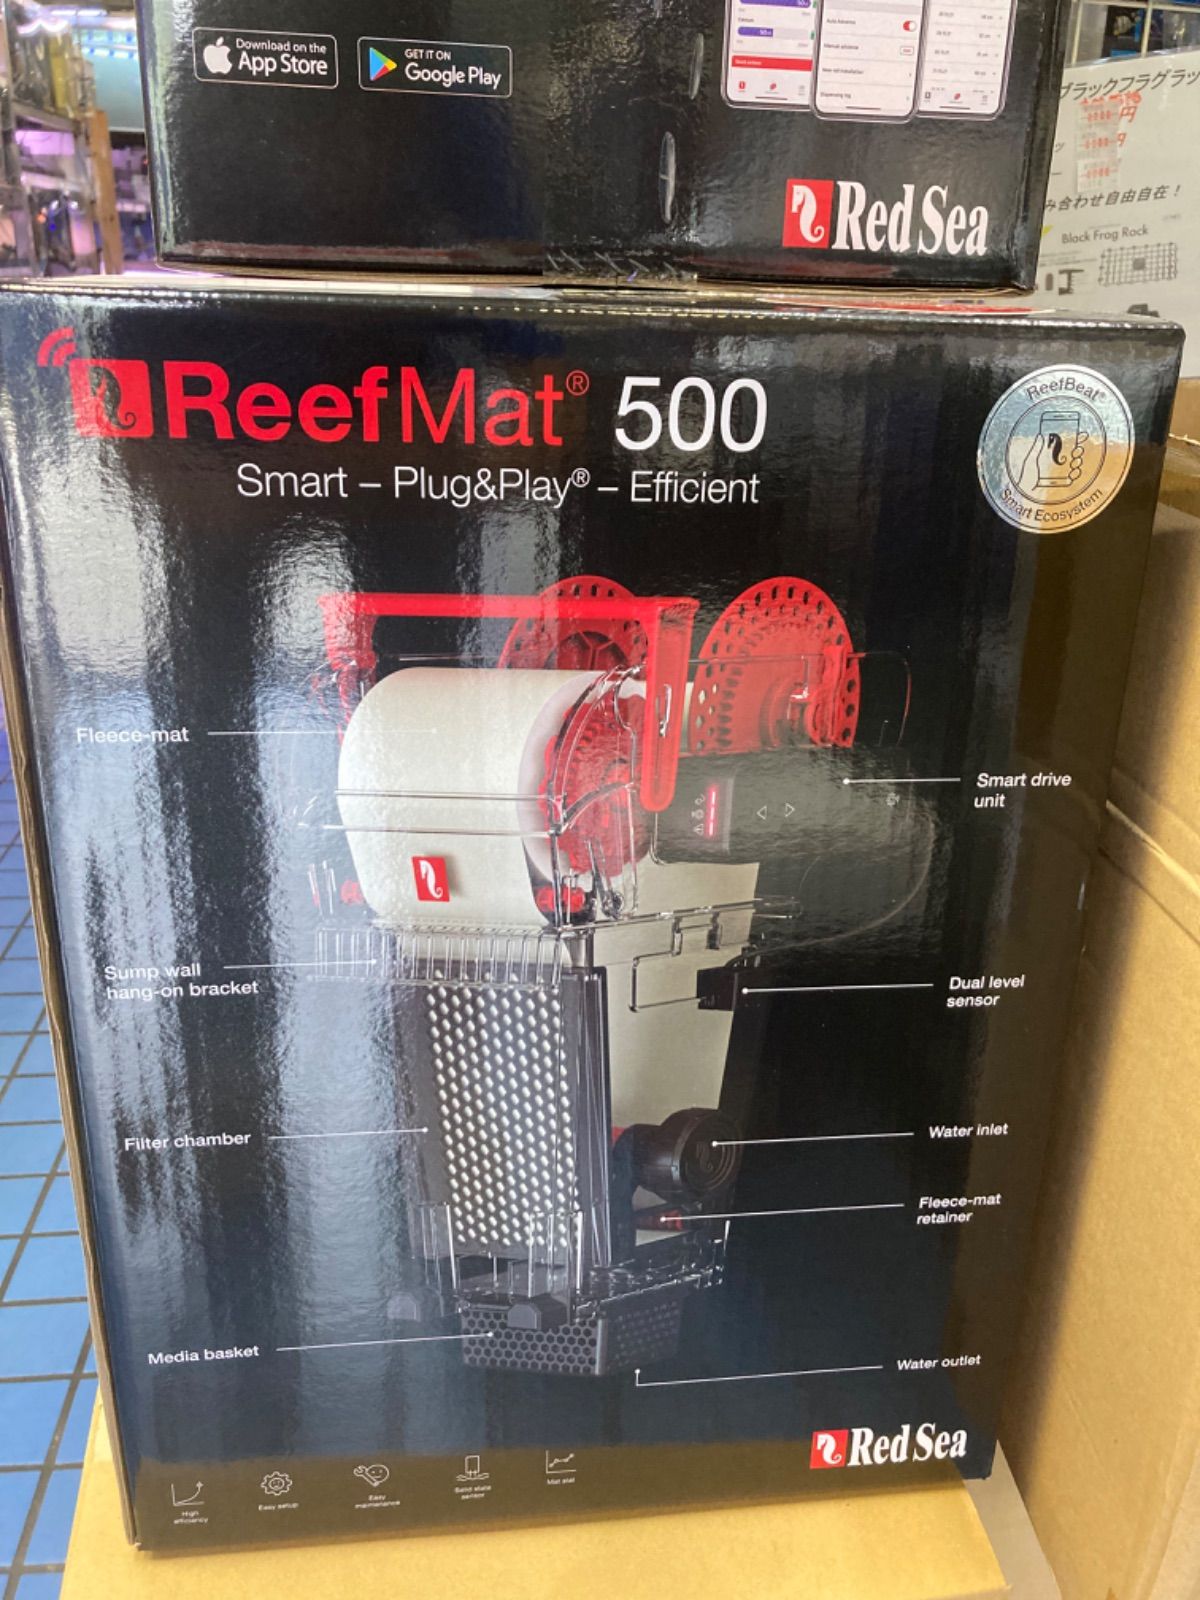 Red Sea ReefMat500 （リーフマット500）